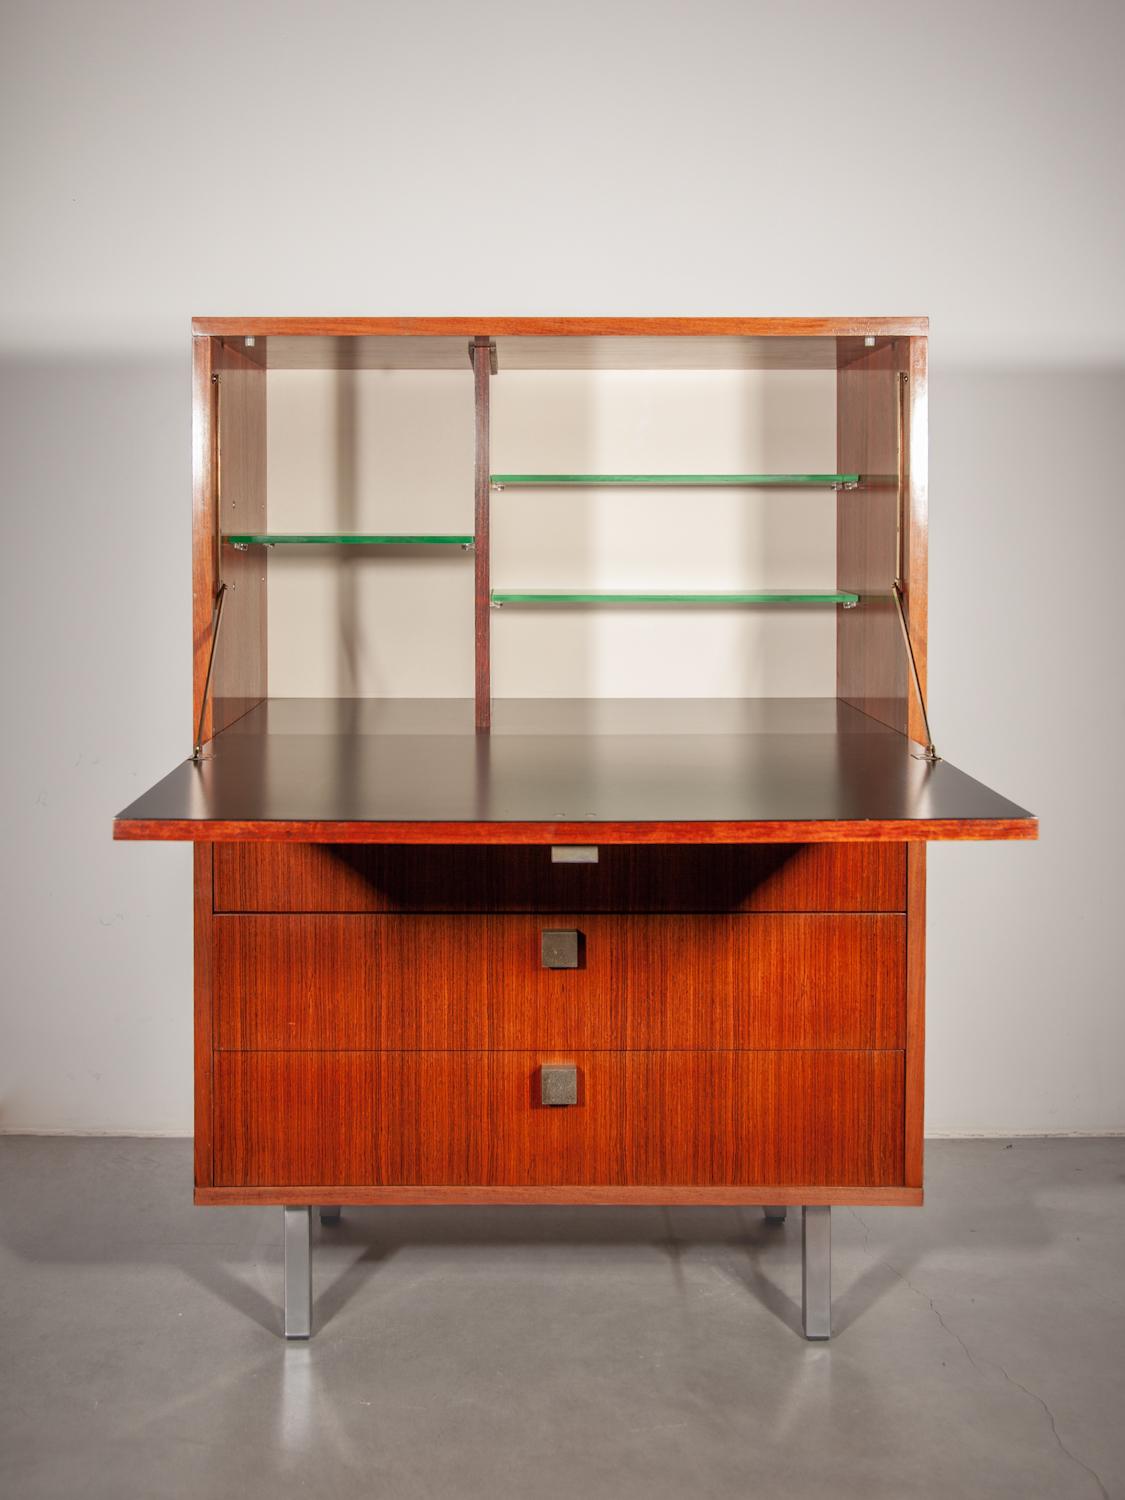 Hand-Crafted Bar Furniture Cabinet designed in 1960s by Alfred Hendrickx for Belform, Belgium